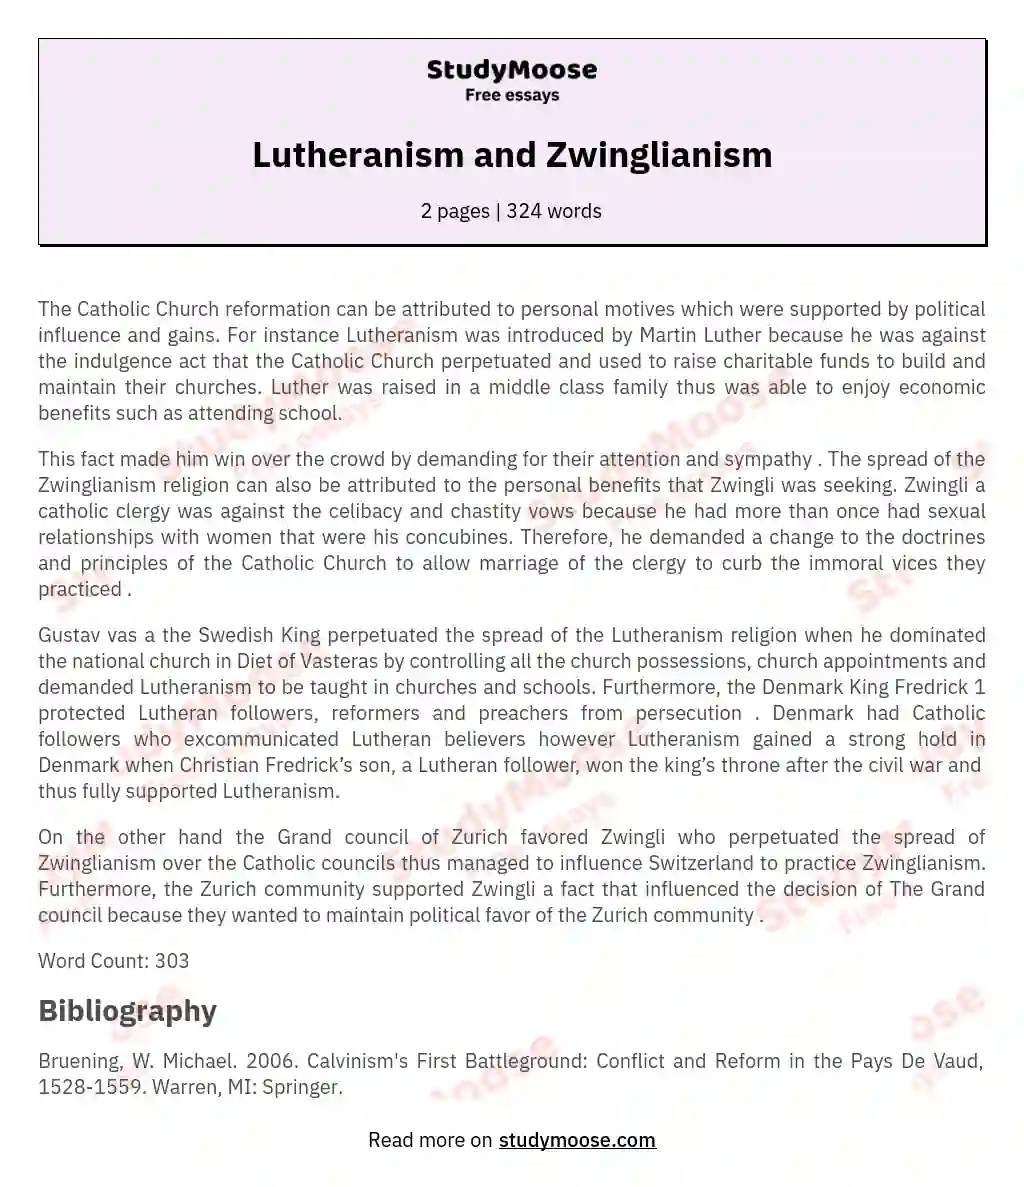 Lutheranism and Zwinglianism essay